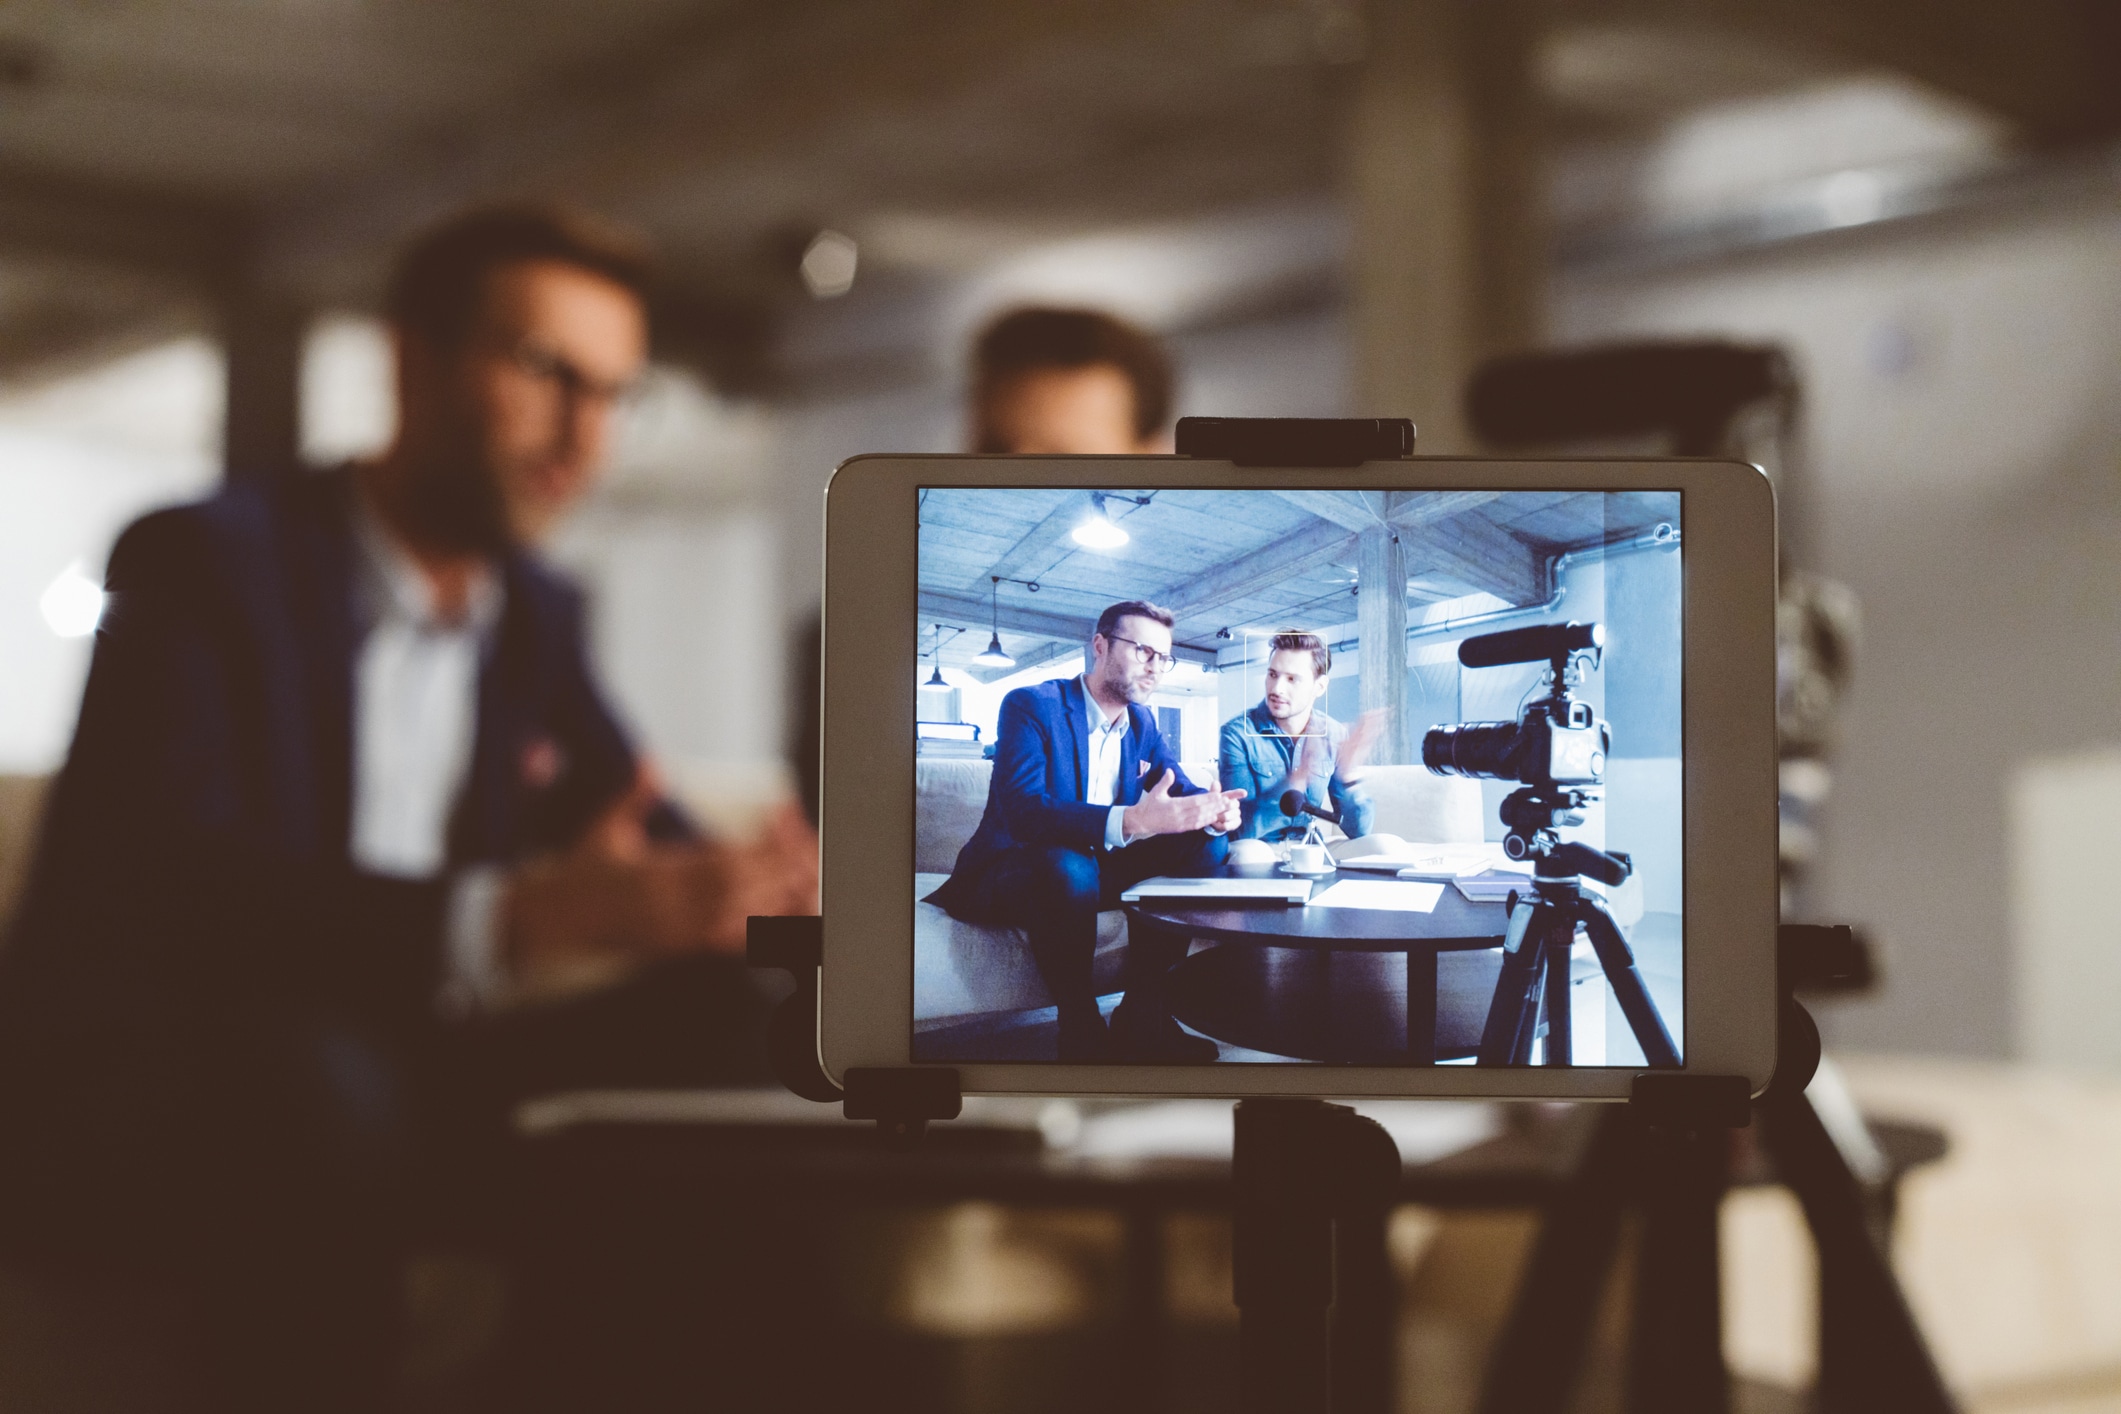 Video Content Marketing: The Key to Audience Growth & Retention